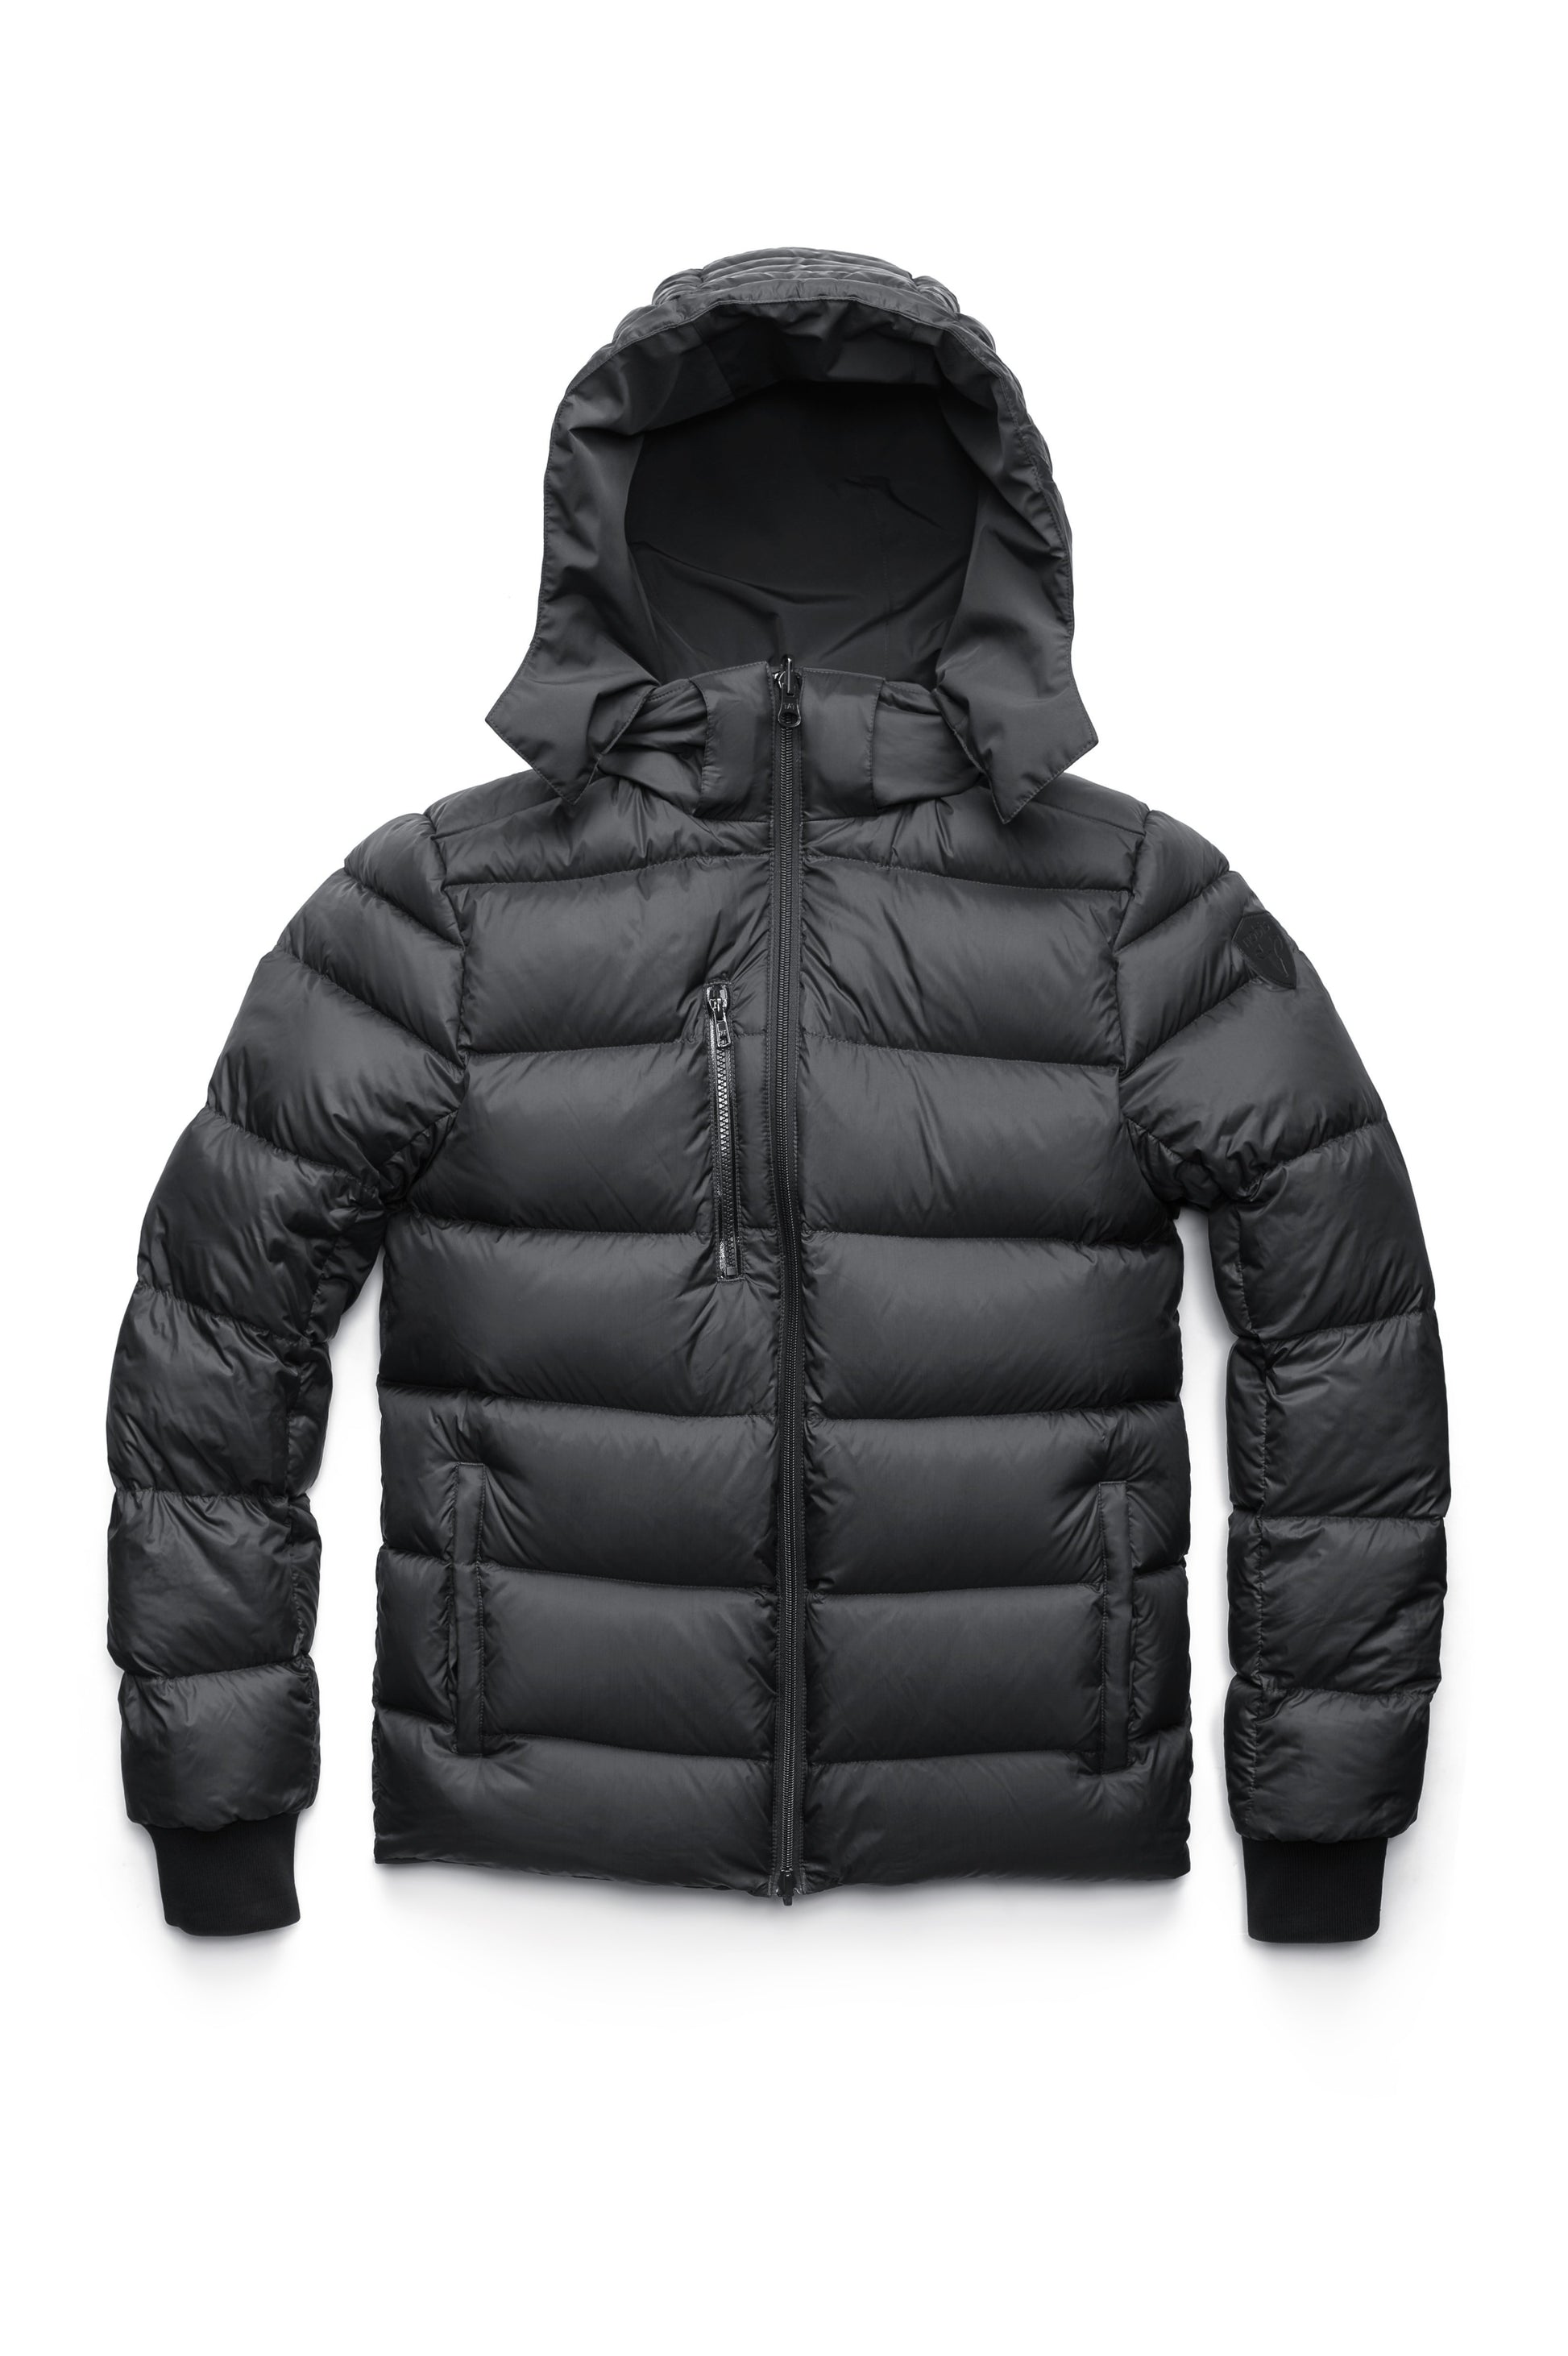 2020 Down Jackets